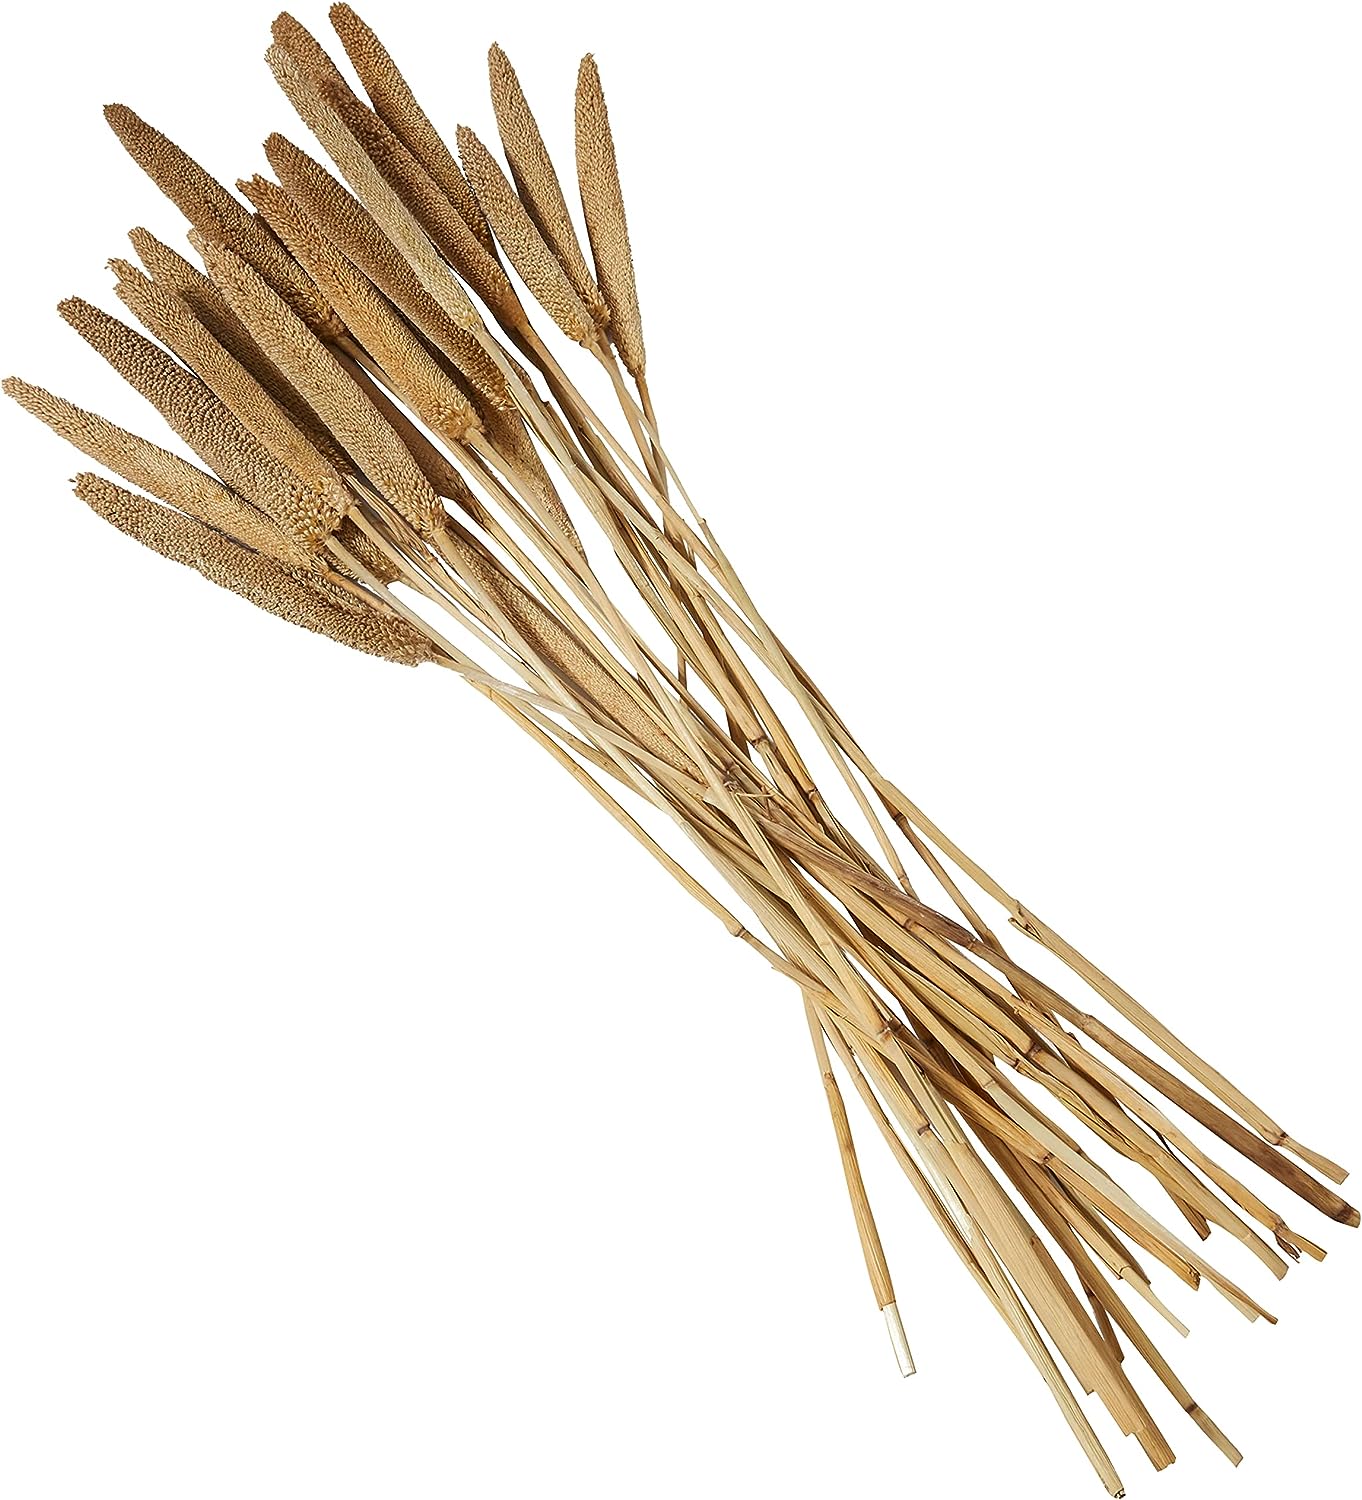 30" dried reeds